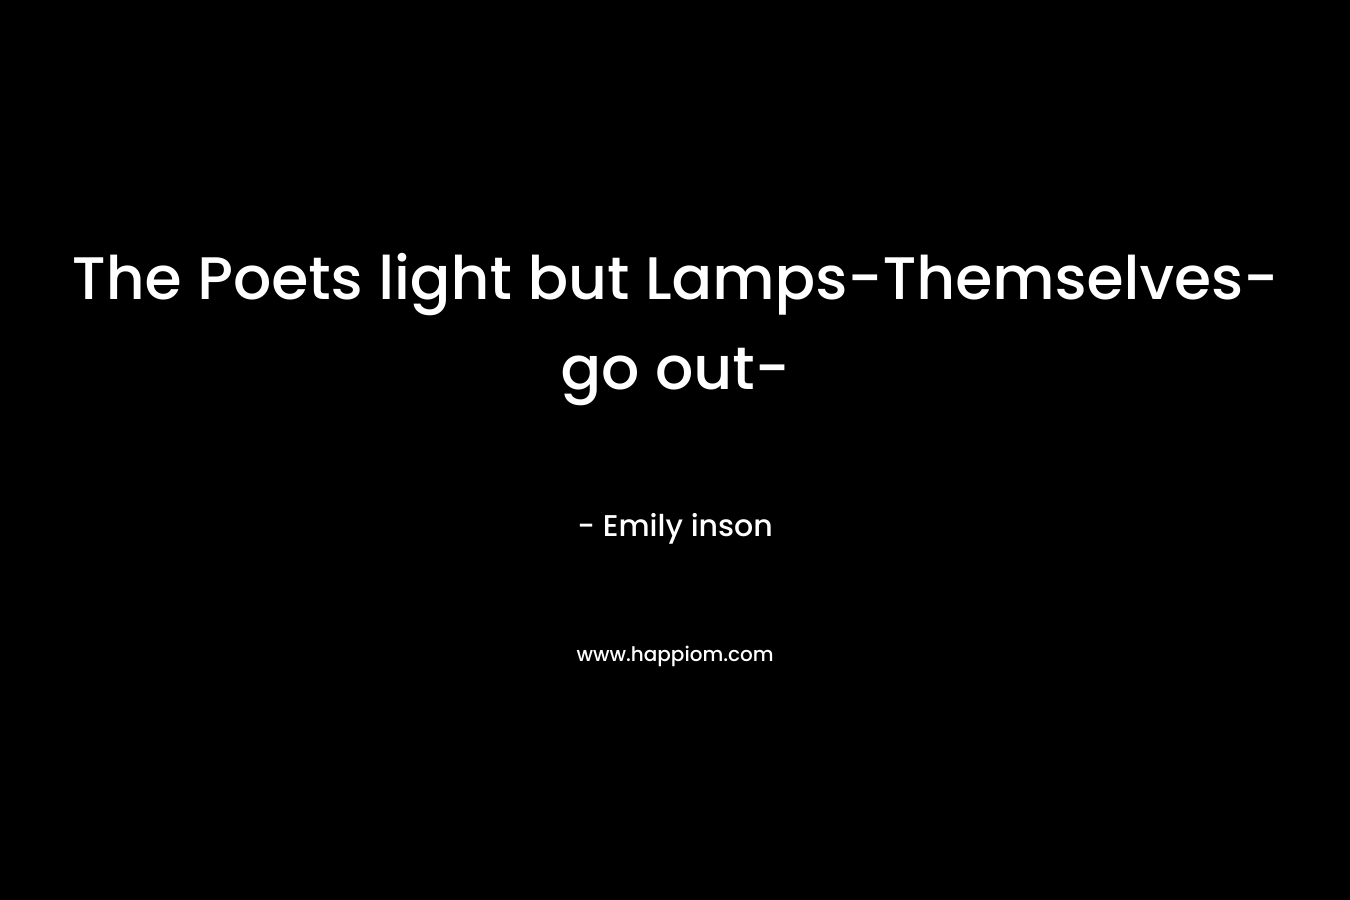 The Poets light but Lamps-Themselves-go out-